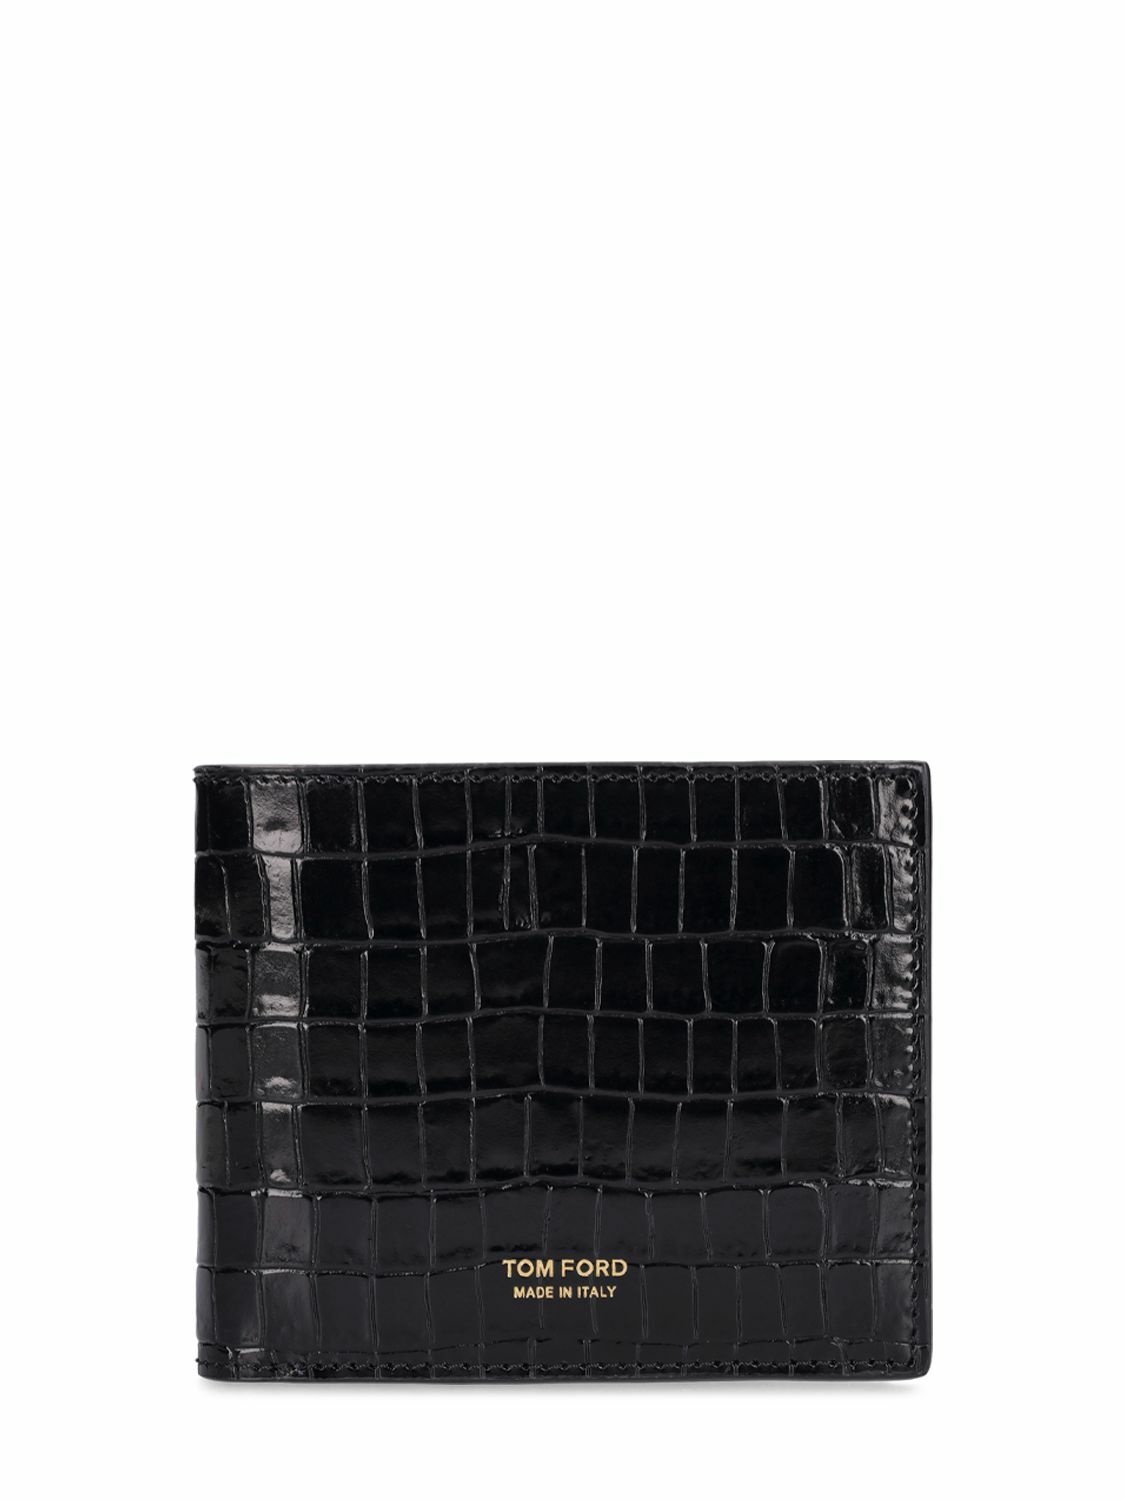 Photo: TOM FORD - Croc Embossed Glossy Leather Wallet